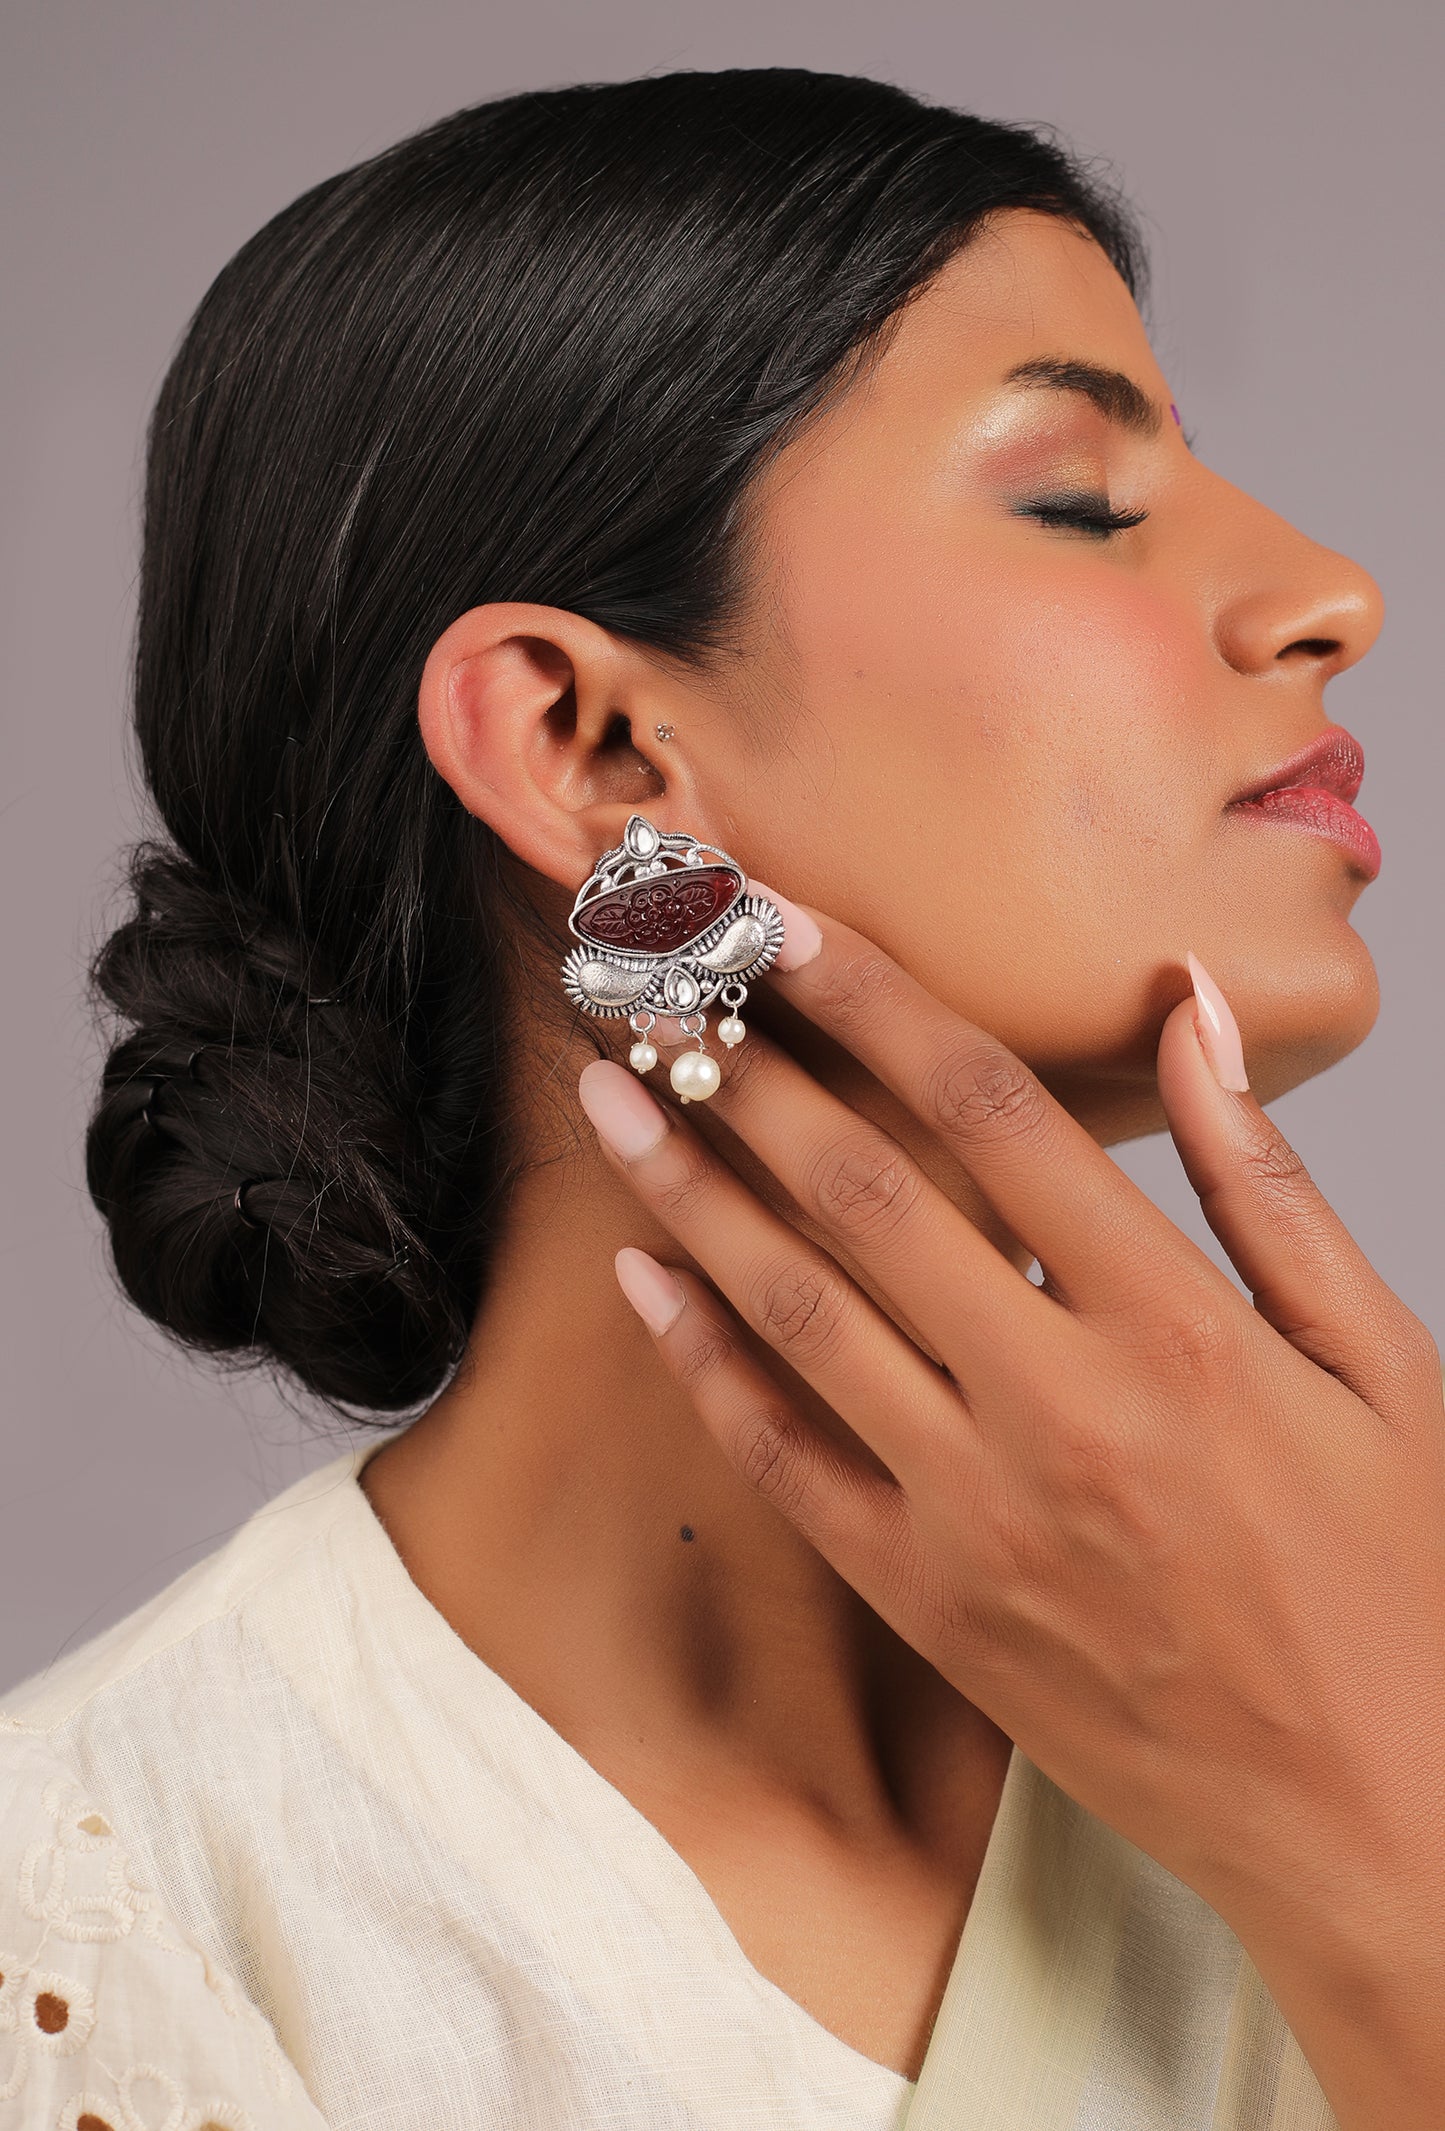 The Encapsulated Carving Stone Candy Earrings in Maroon